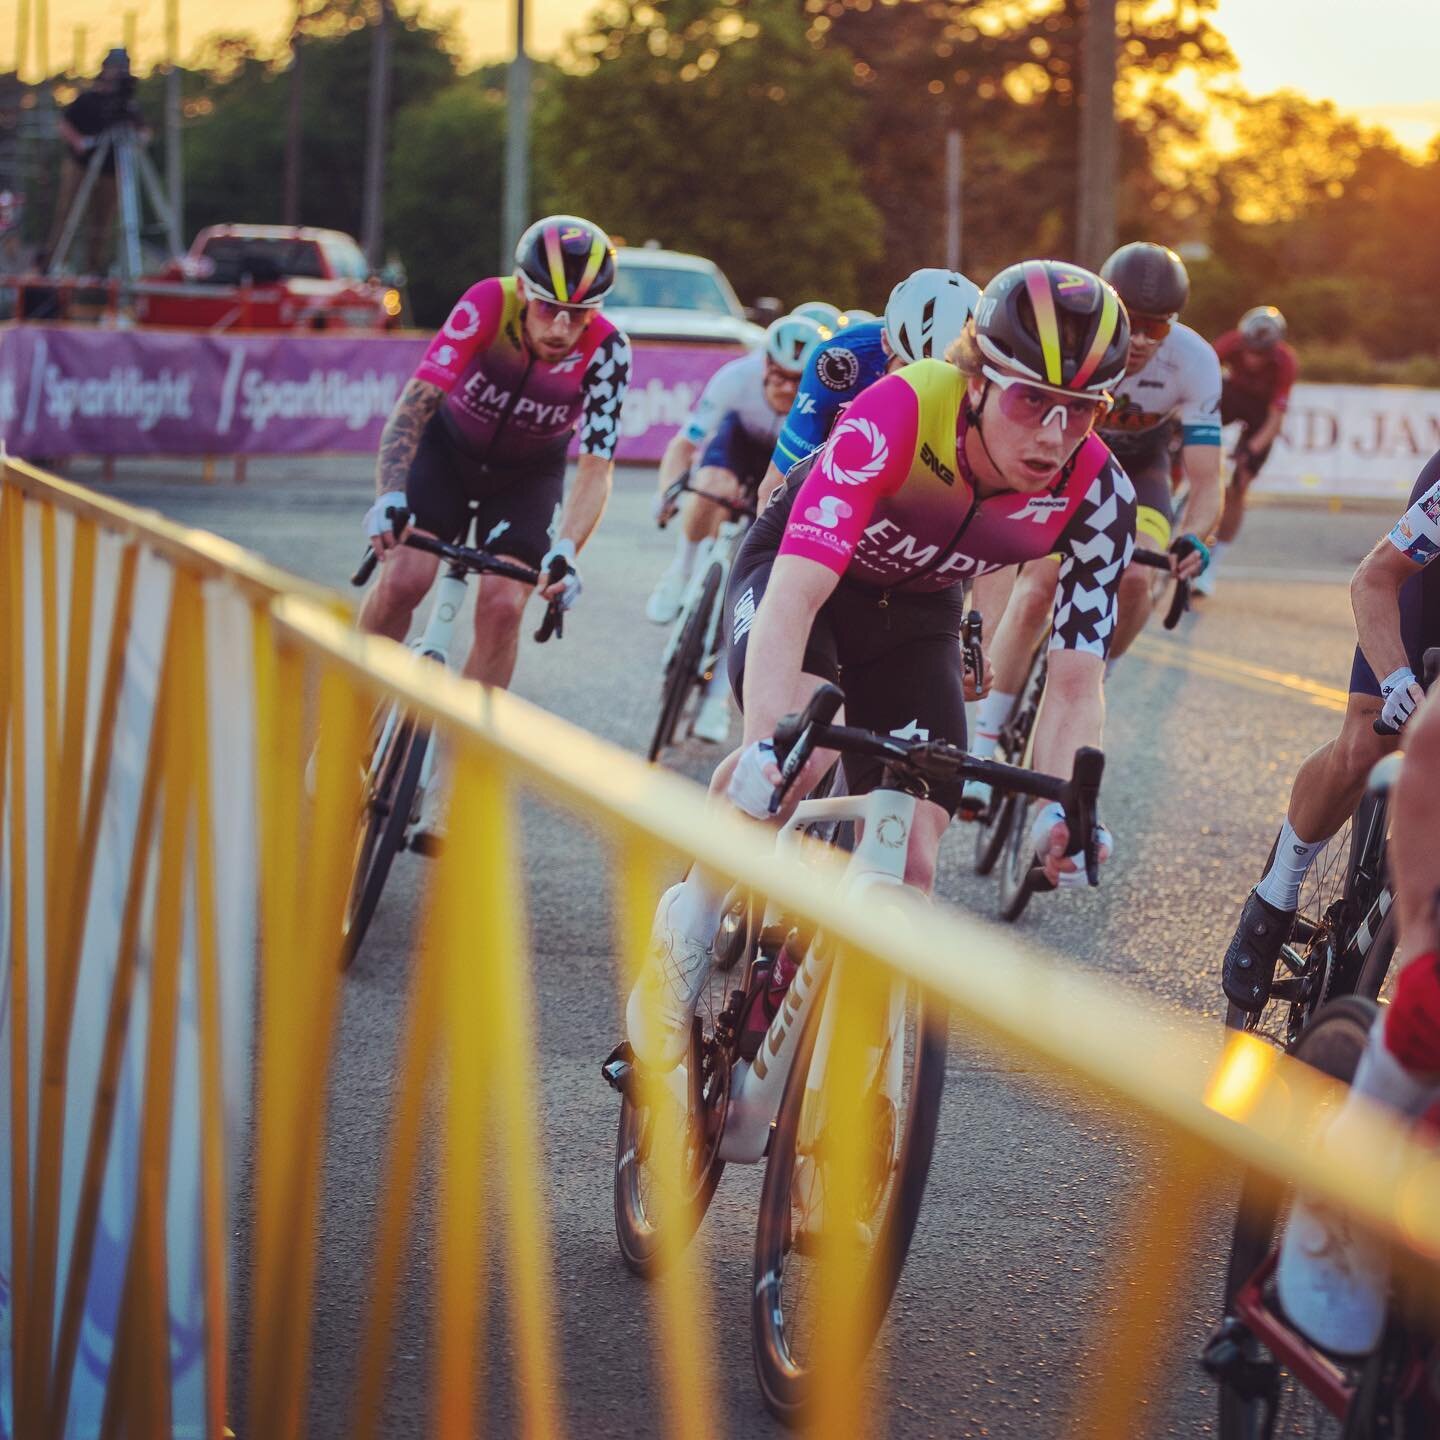 The team has been banking some much needed racing efforts in the southeast. Our SLC winter has been relentless this year - glad it&rsquo;s finally come to a close. Here&rsquo;s to warmer weather, long days, and twilight crits. We live for this. 

📸: